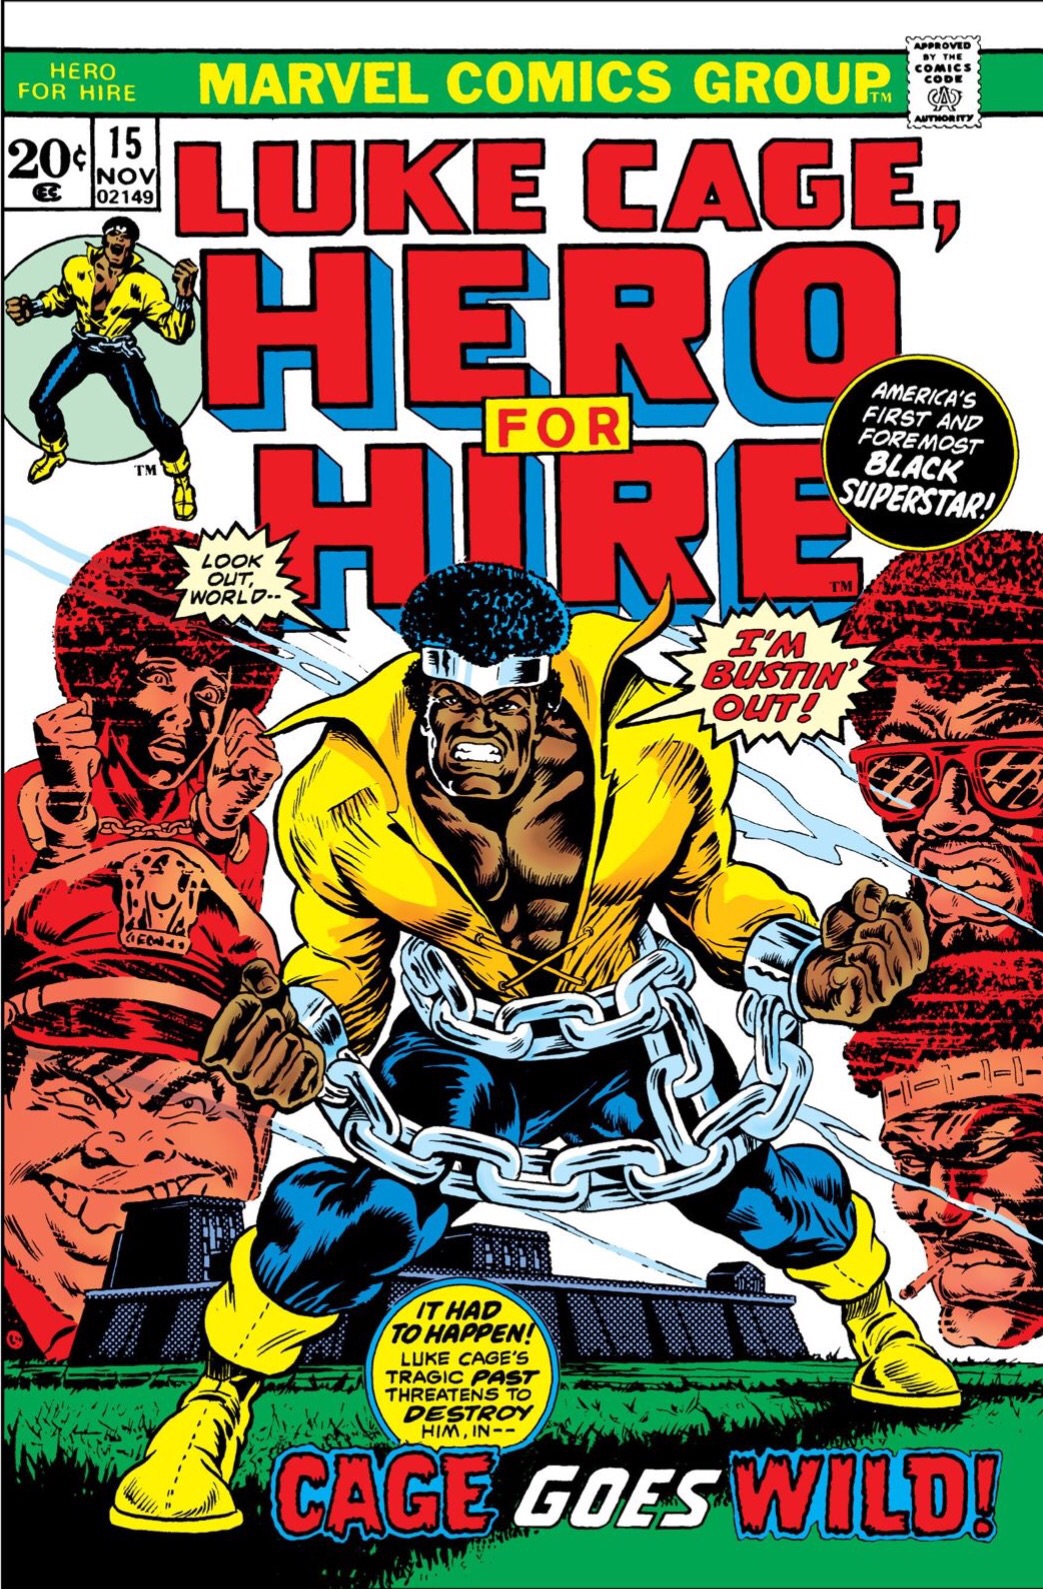 16 Smashing Luke Cage, Hero for Hire Covers!